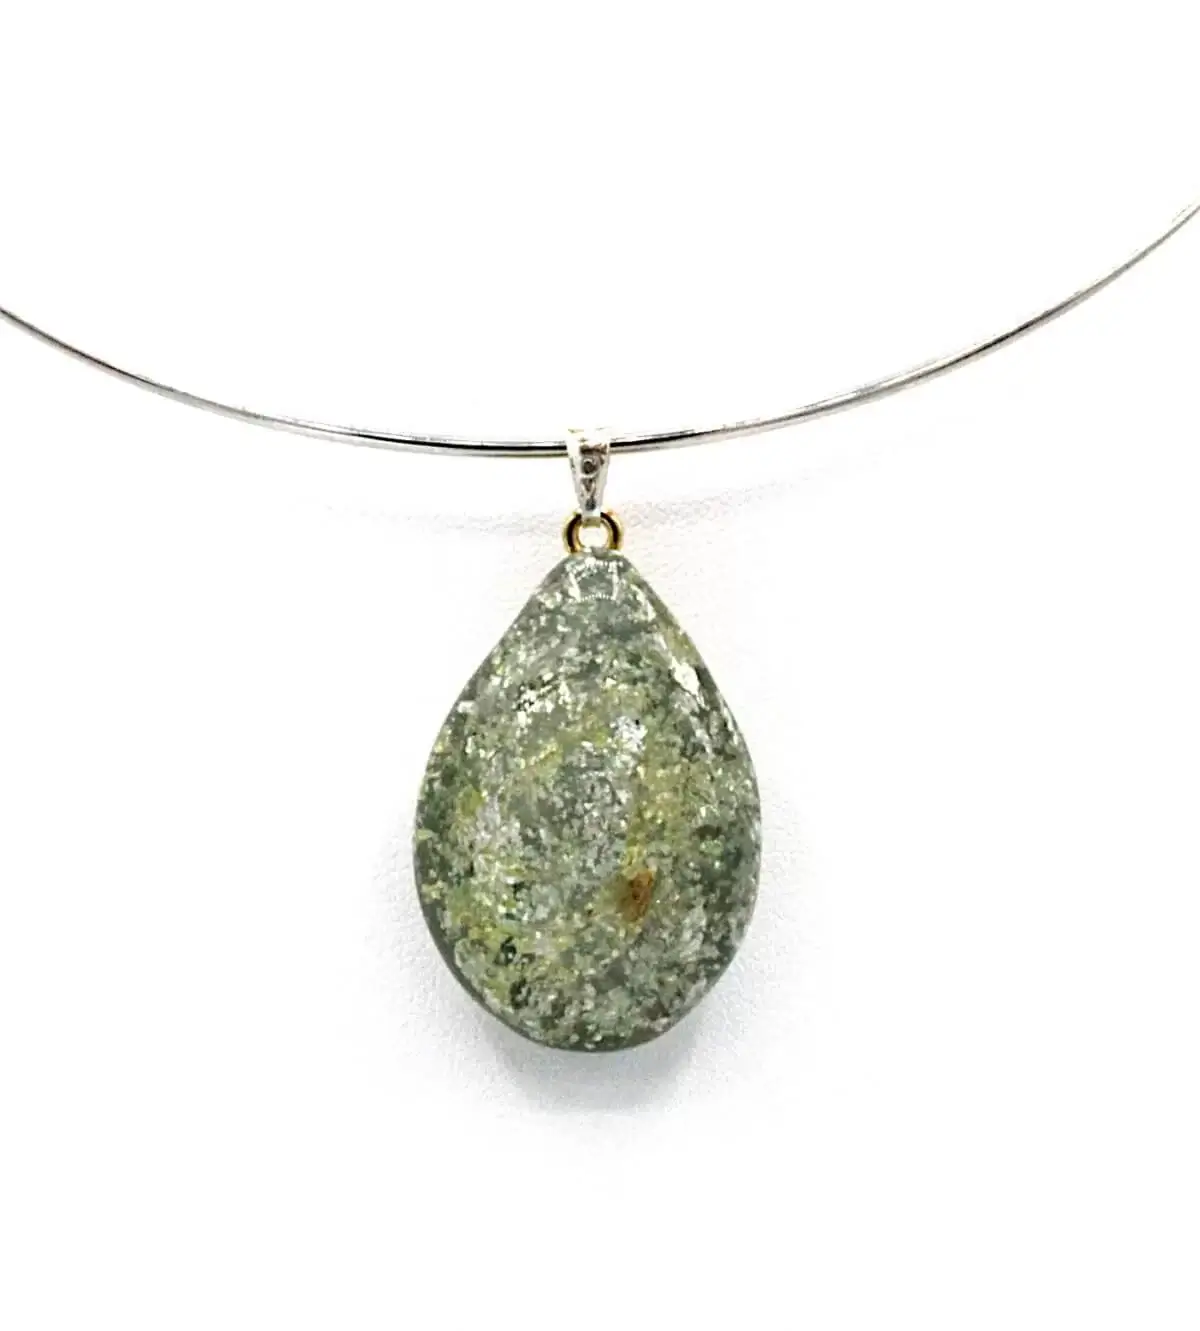 gray green tone Murano glass teardrop pendant with silver infusion. on collar necklace